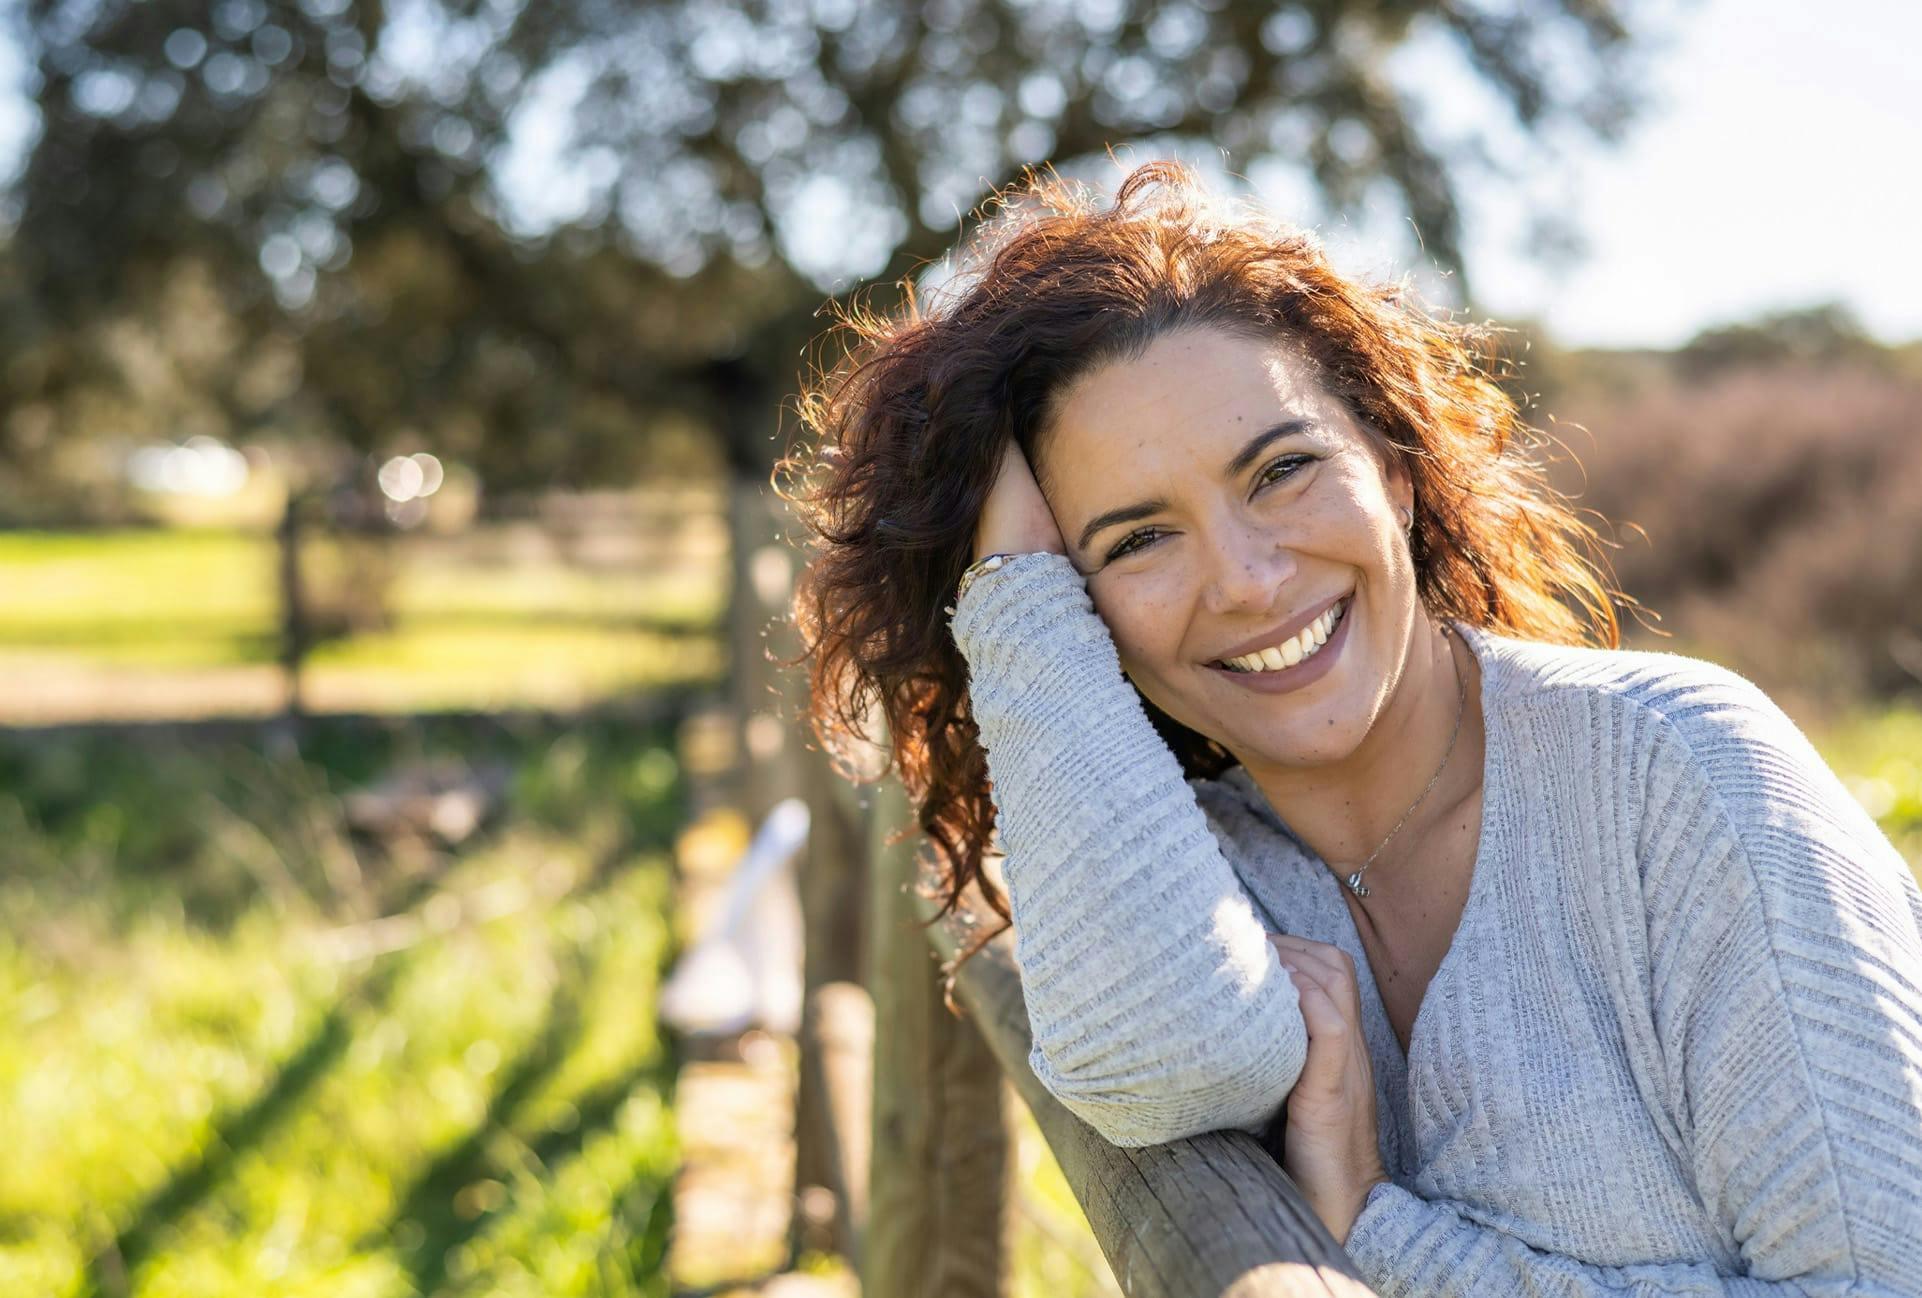 smiling woman leaning on fence holding head